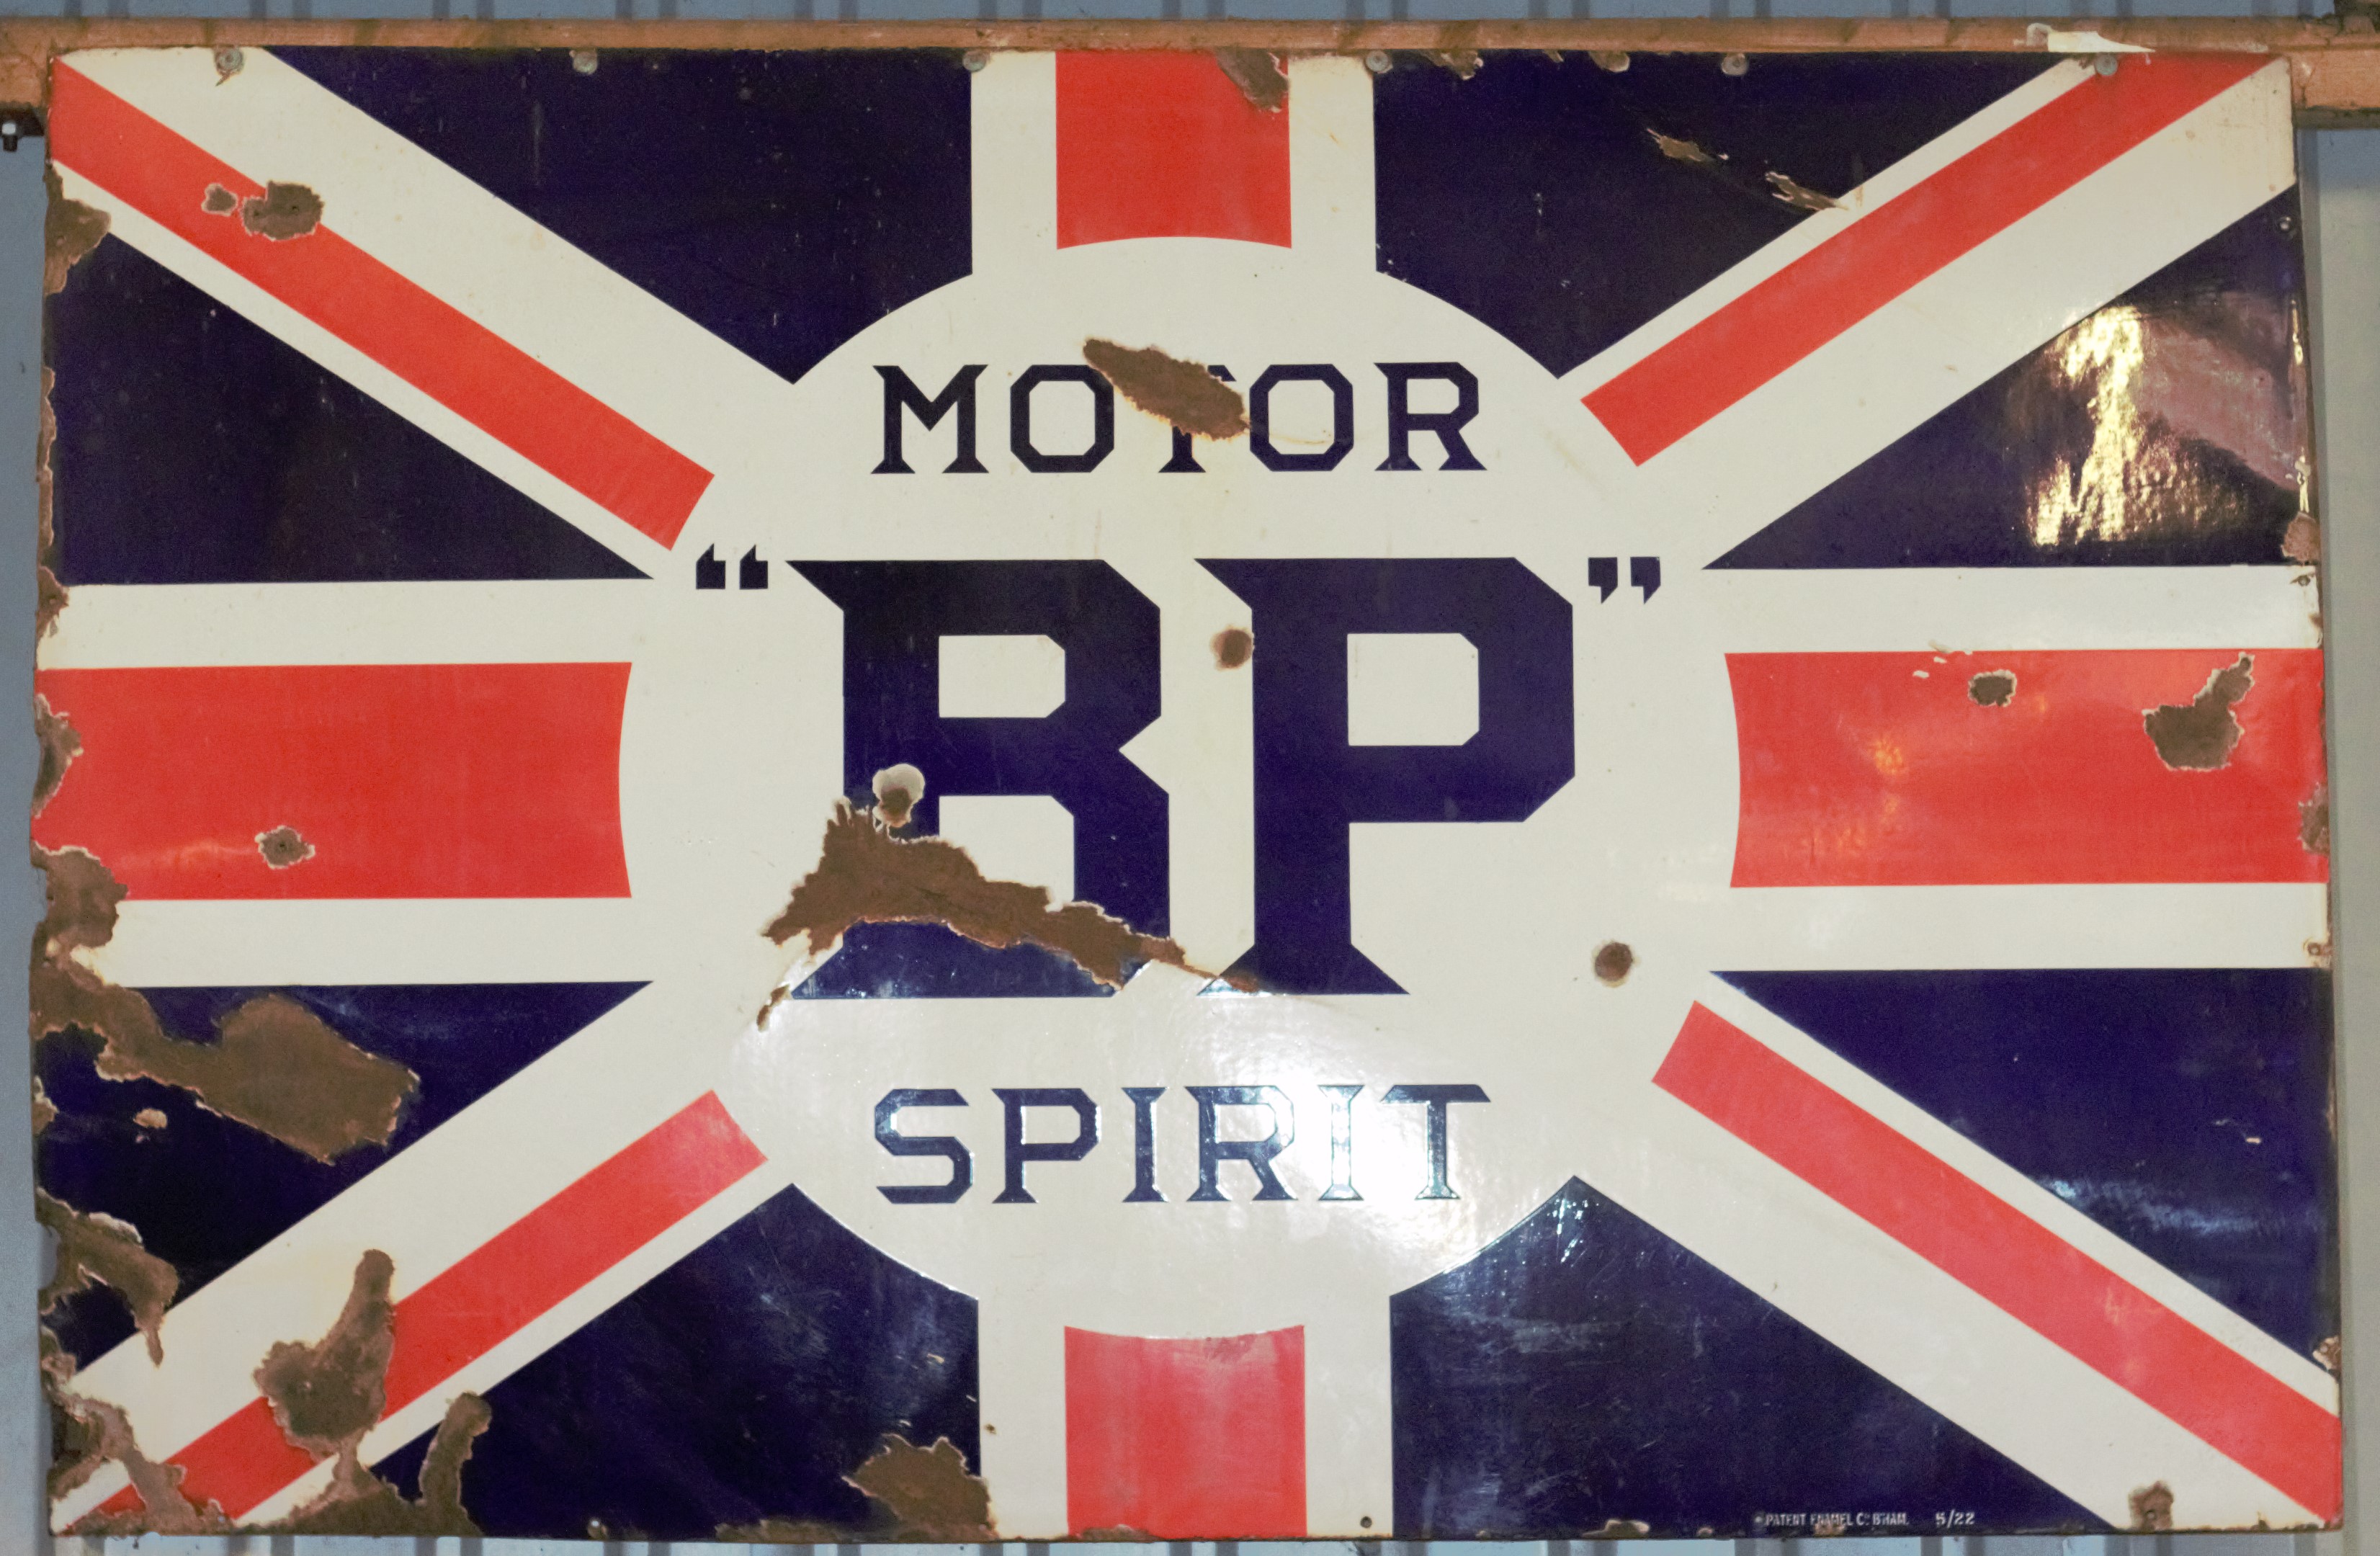 Vintage enamel advertising sign 'BP Motor Spirit', 122 x 183cm PLEASE NOTE this lot is located at